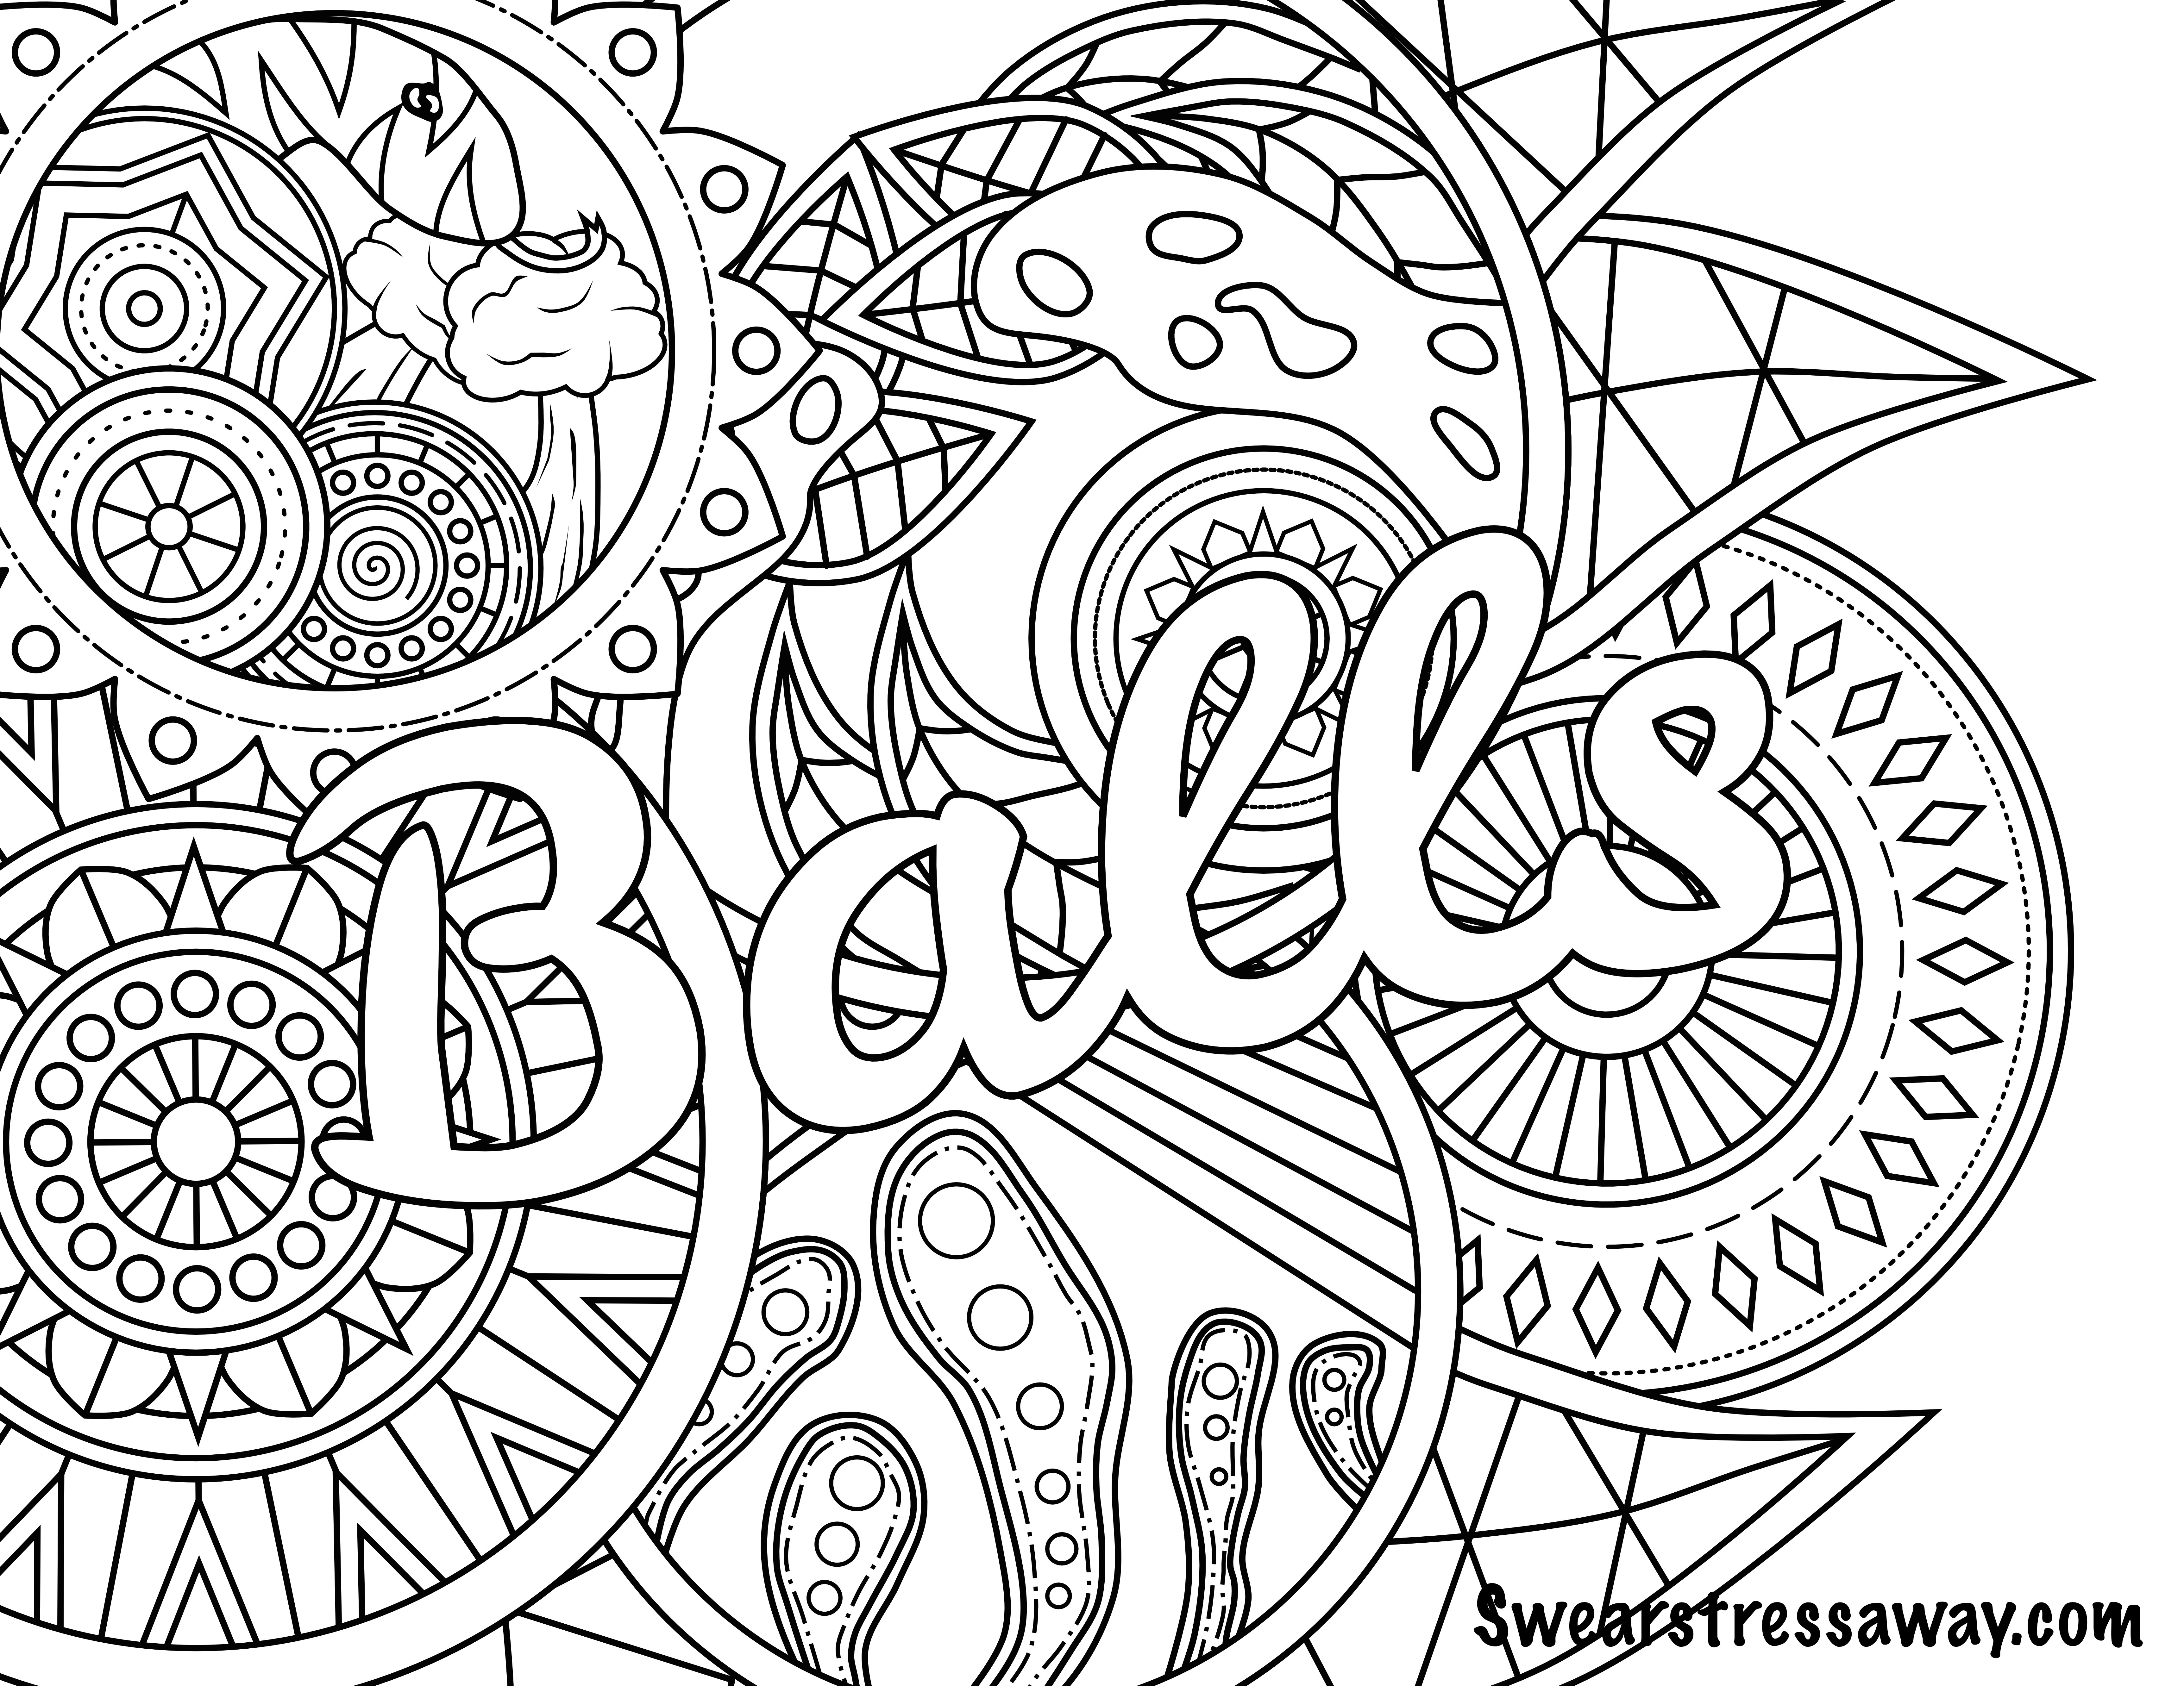 Swear Word Adult Coloring Pages
 Balls Swear Word Coloring Page Adult Coloring Page